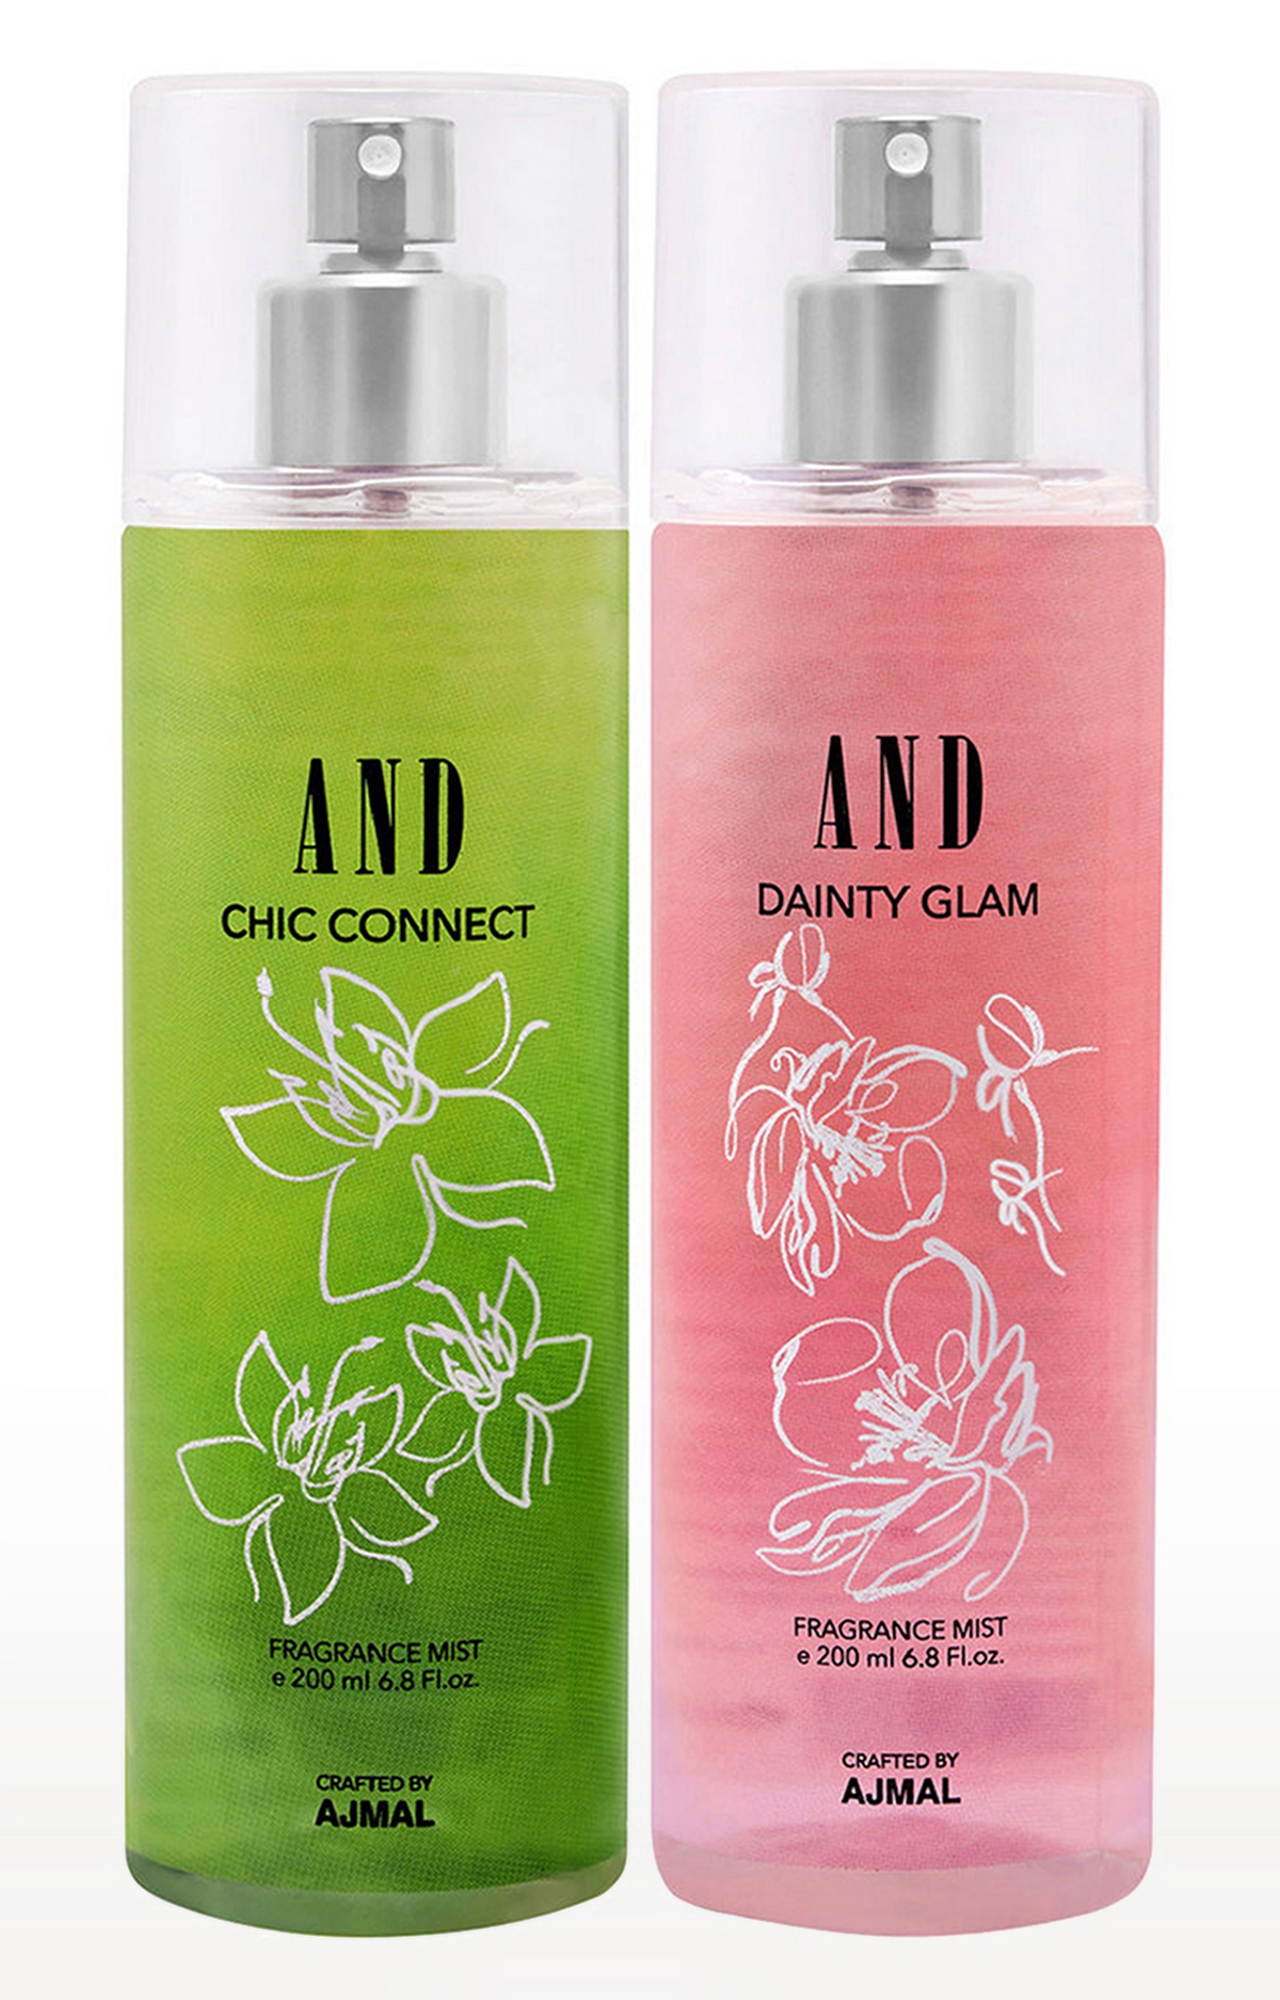 AND Crafted By Ajmal | AND Chic Connect & Dainty Glam Pack of 2 Body Mist 200ML each Long Lasting Scent Spray Gift For Women Perfume Crafted by Ajmal FREE